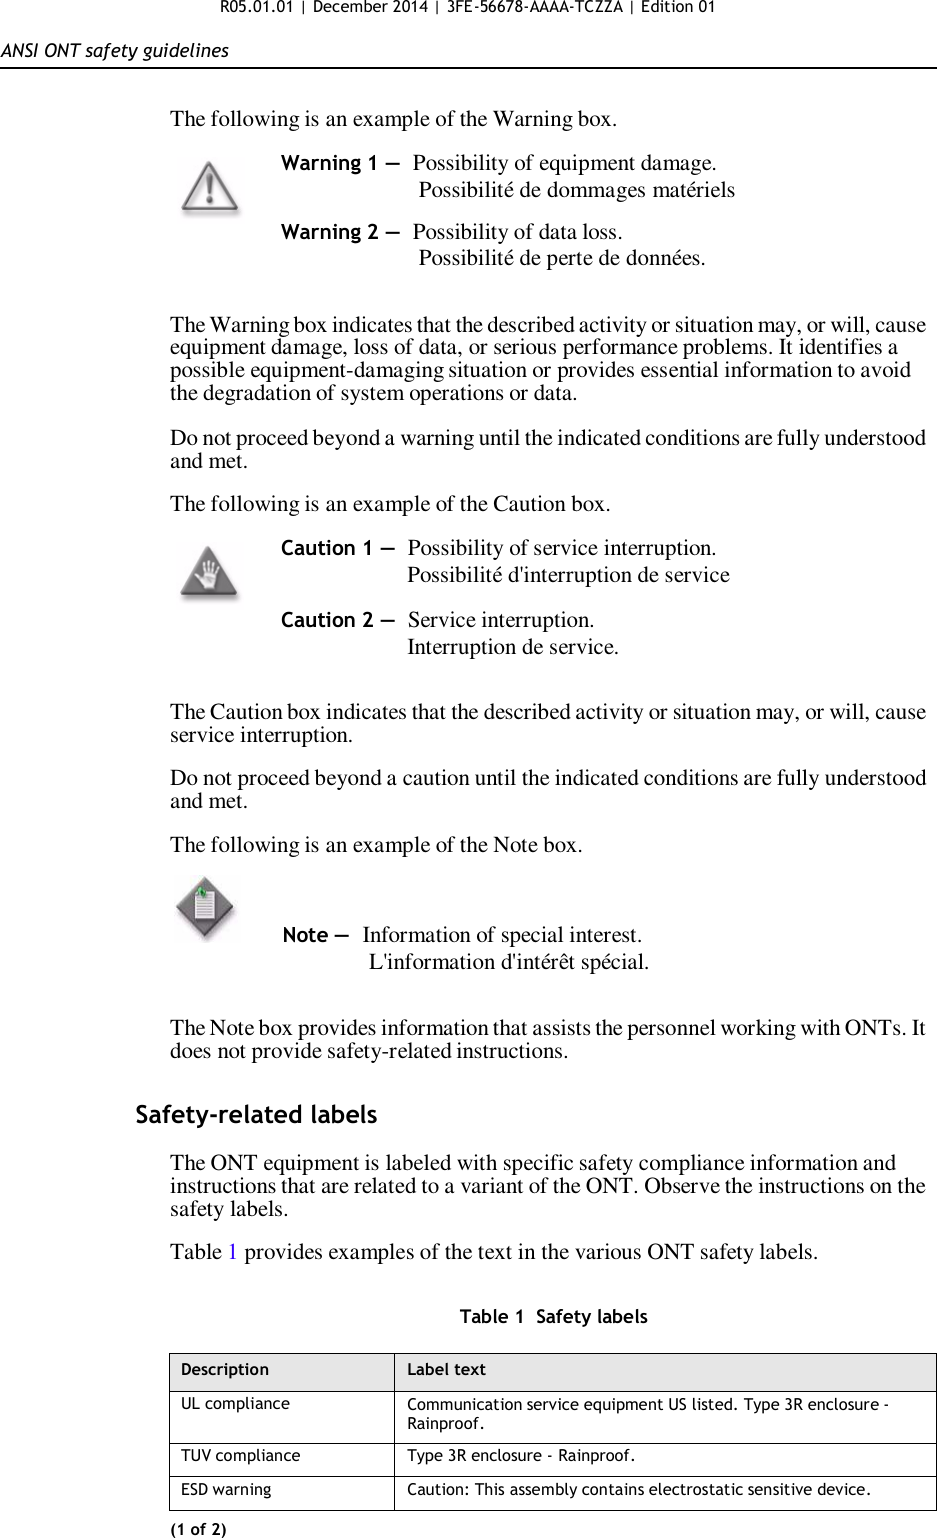 R05.01.01 | December 2014 | 3FE-56678-AAAA-TCZZA | Edition 01   ANSI ONT safety guidelines   The following is an example of the Warning box.  Warning 1 — Possibility of equipment damage. Possibilité de dommages matériels  Warning 2 — Possibility of data loss. Possibilité de perte de données.   The Warning box indicates that the described activity or situation may, or will, cause equipment damage, loss of data, or serious performance problems. It identifies a possible equipment-damaging situation or provides essential information to avoid the degradation of system operations or data.  Do not proceed beyond a warning until the indicated conditions are fully understood and met.  The following is an example of the Caution box.  Caution 1 — Possibility of service interruption. Possibilité d&apos;interruption de service  Caution 2 — Service interruption. Interruption de service.   The Caution box indicates that the described activity or situation may, or will, cause service interruption.  Do not proceed beyond a caution until the indicated conditions are fully understood and met.  The following is an example of the Note box.          Note —  Information of special interest. L&apos;information d&apos;intérêt spécial.   The Note box provides information that assists the personnel working with ONTs. It does not provide safety-related instructions.   Safety-related labels  The ONT equipment is labeled with specific safety compliance information and instructions that are related to a variant of the ONT. Observe the instructions on the safety labels.  Table 1 provides examples of the text in the various ONT safety labels.   Table 1  Safety labels  Description Label text UL compliance Communication service equipment US listed. Type 3R enclosure - Rainproof. TUV compliance Type 3R enclosure - Rainproof. ESD warning Caution: This assembly contains electrostatic sensitive device. (1 of 2) 